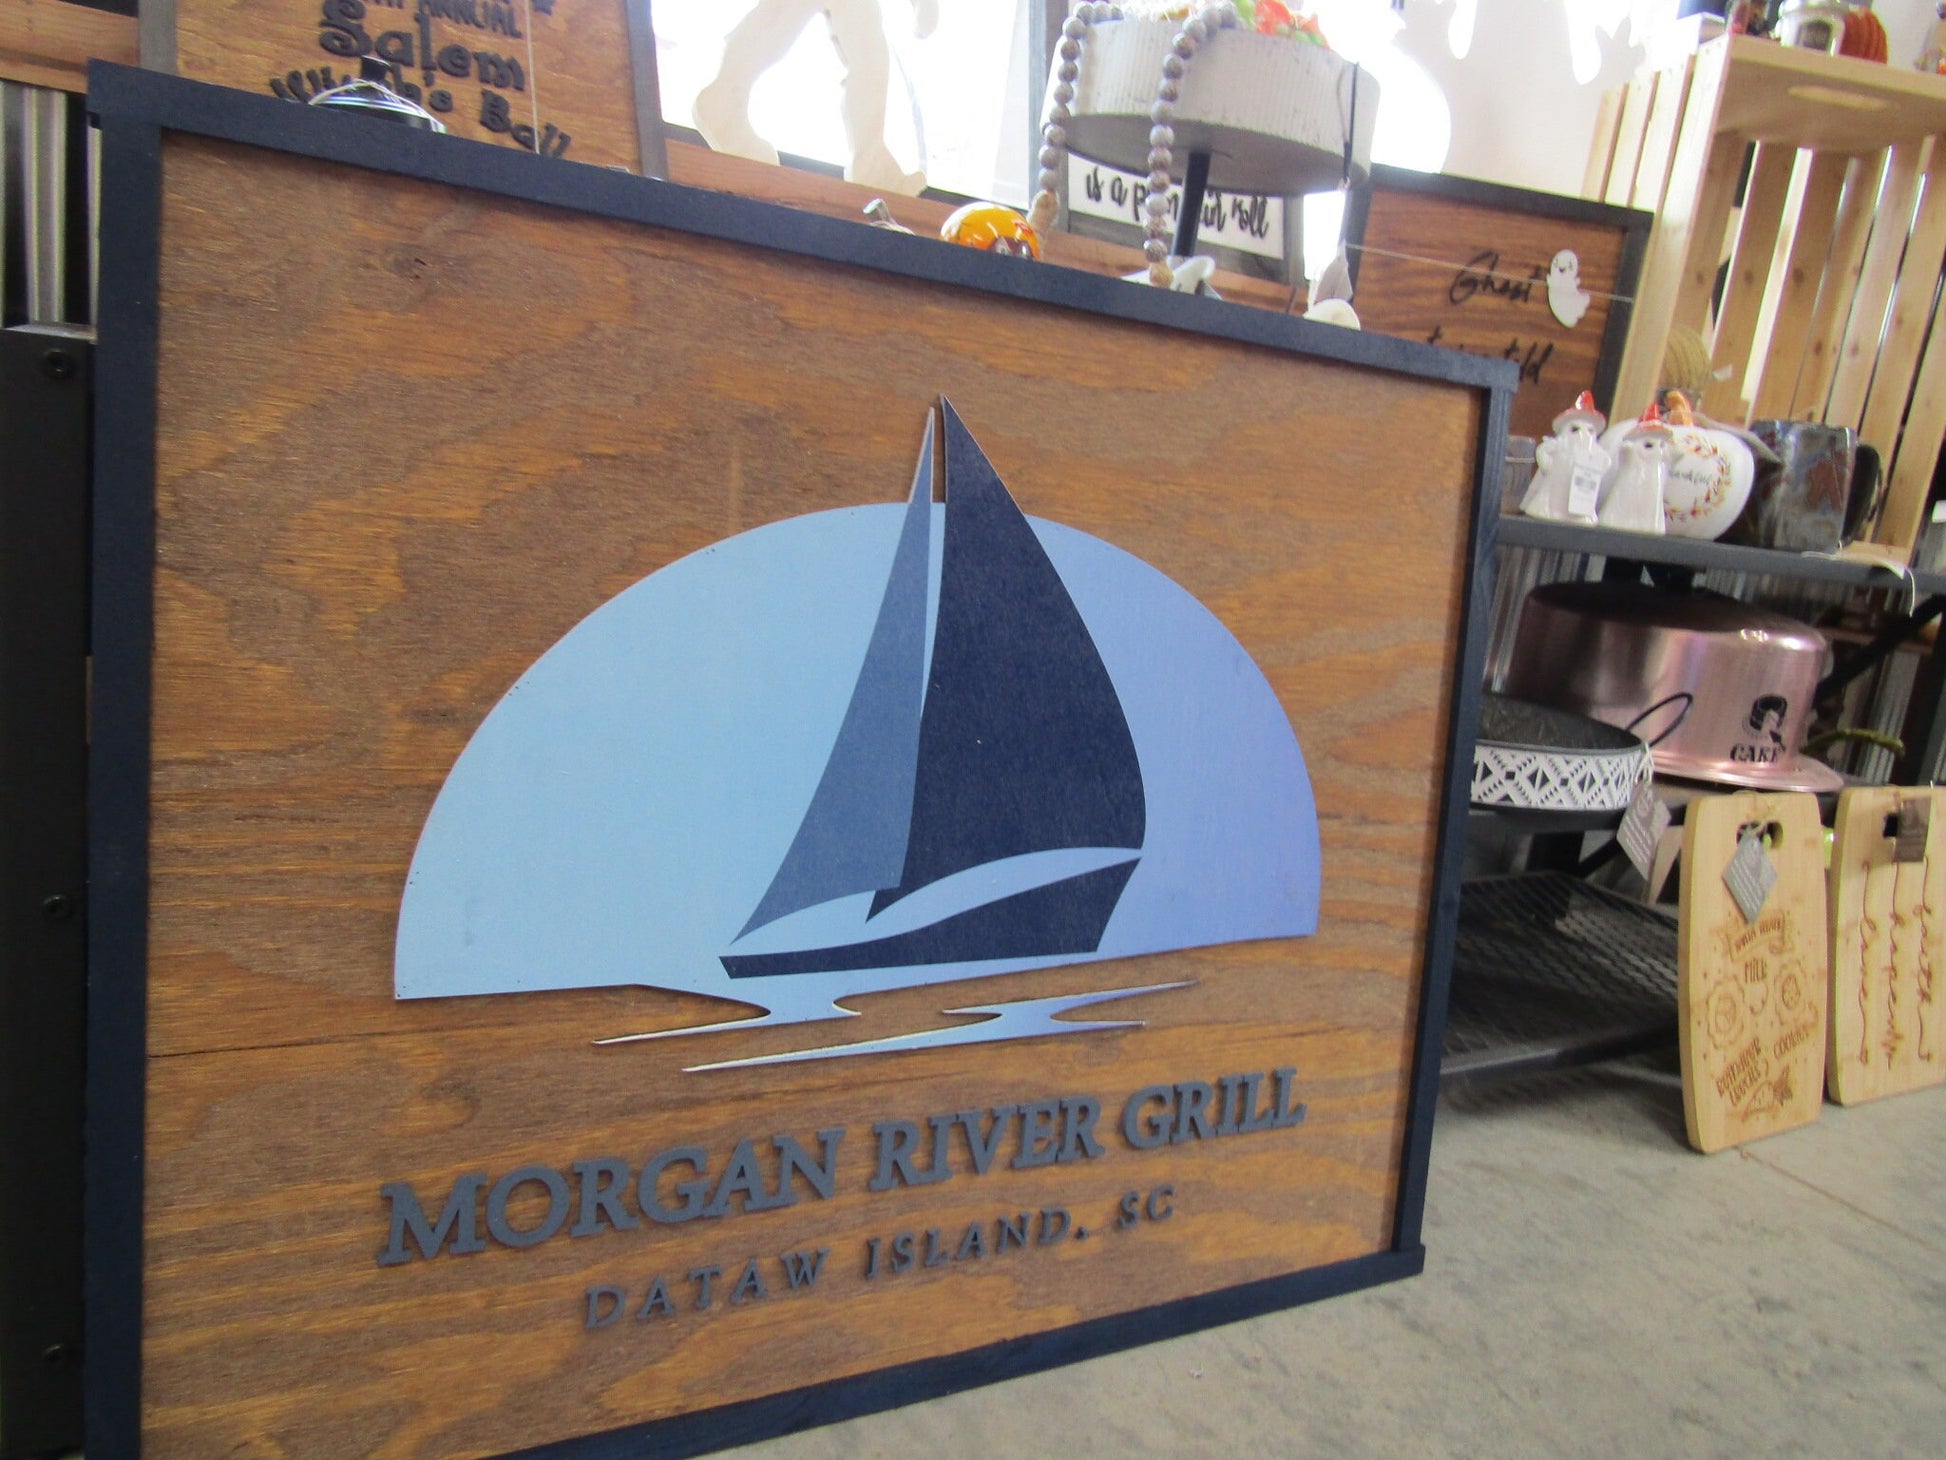 Bar and Grill River Food and Drink Eatery Sailboat Lake Life Commerical Signage Business Handmade Elevated Raised Lettering and Logo Custom